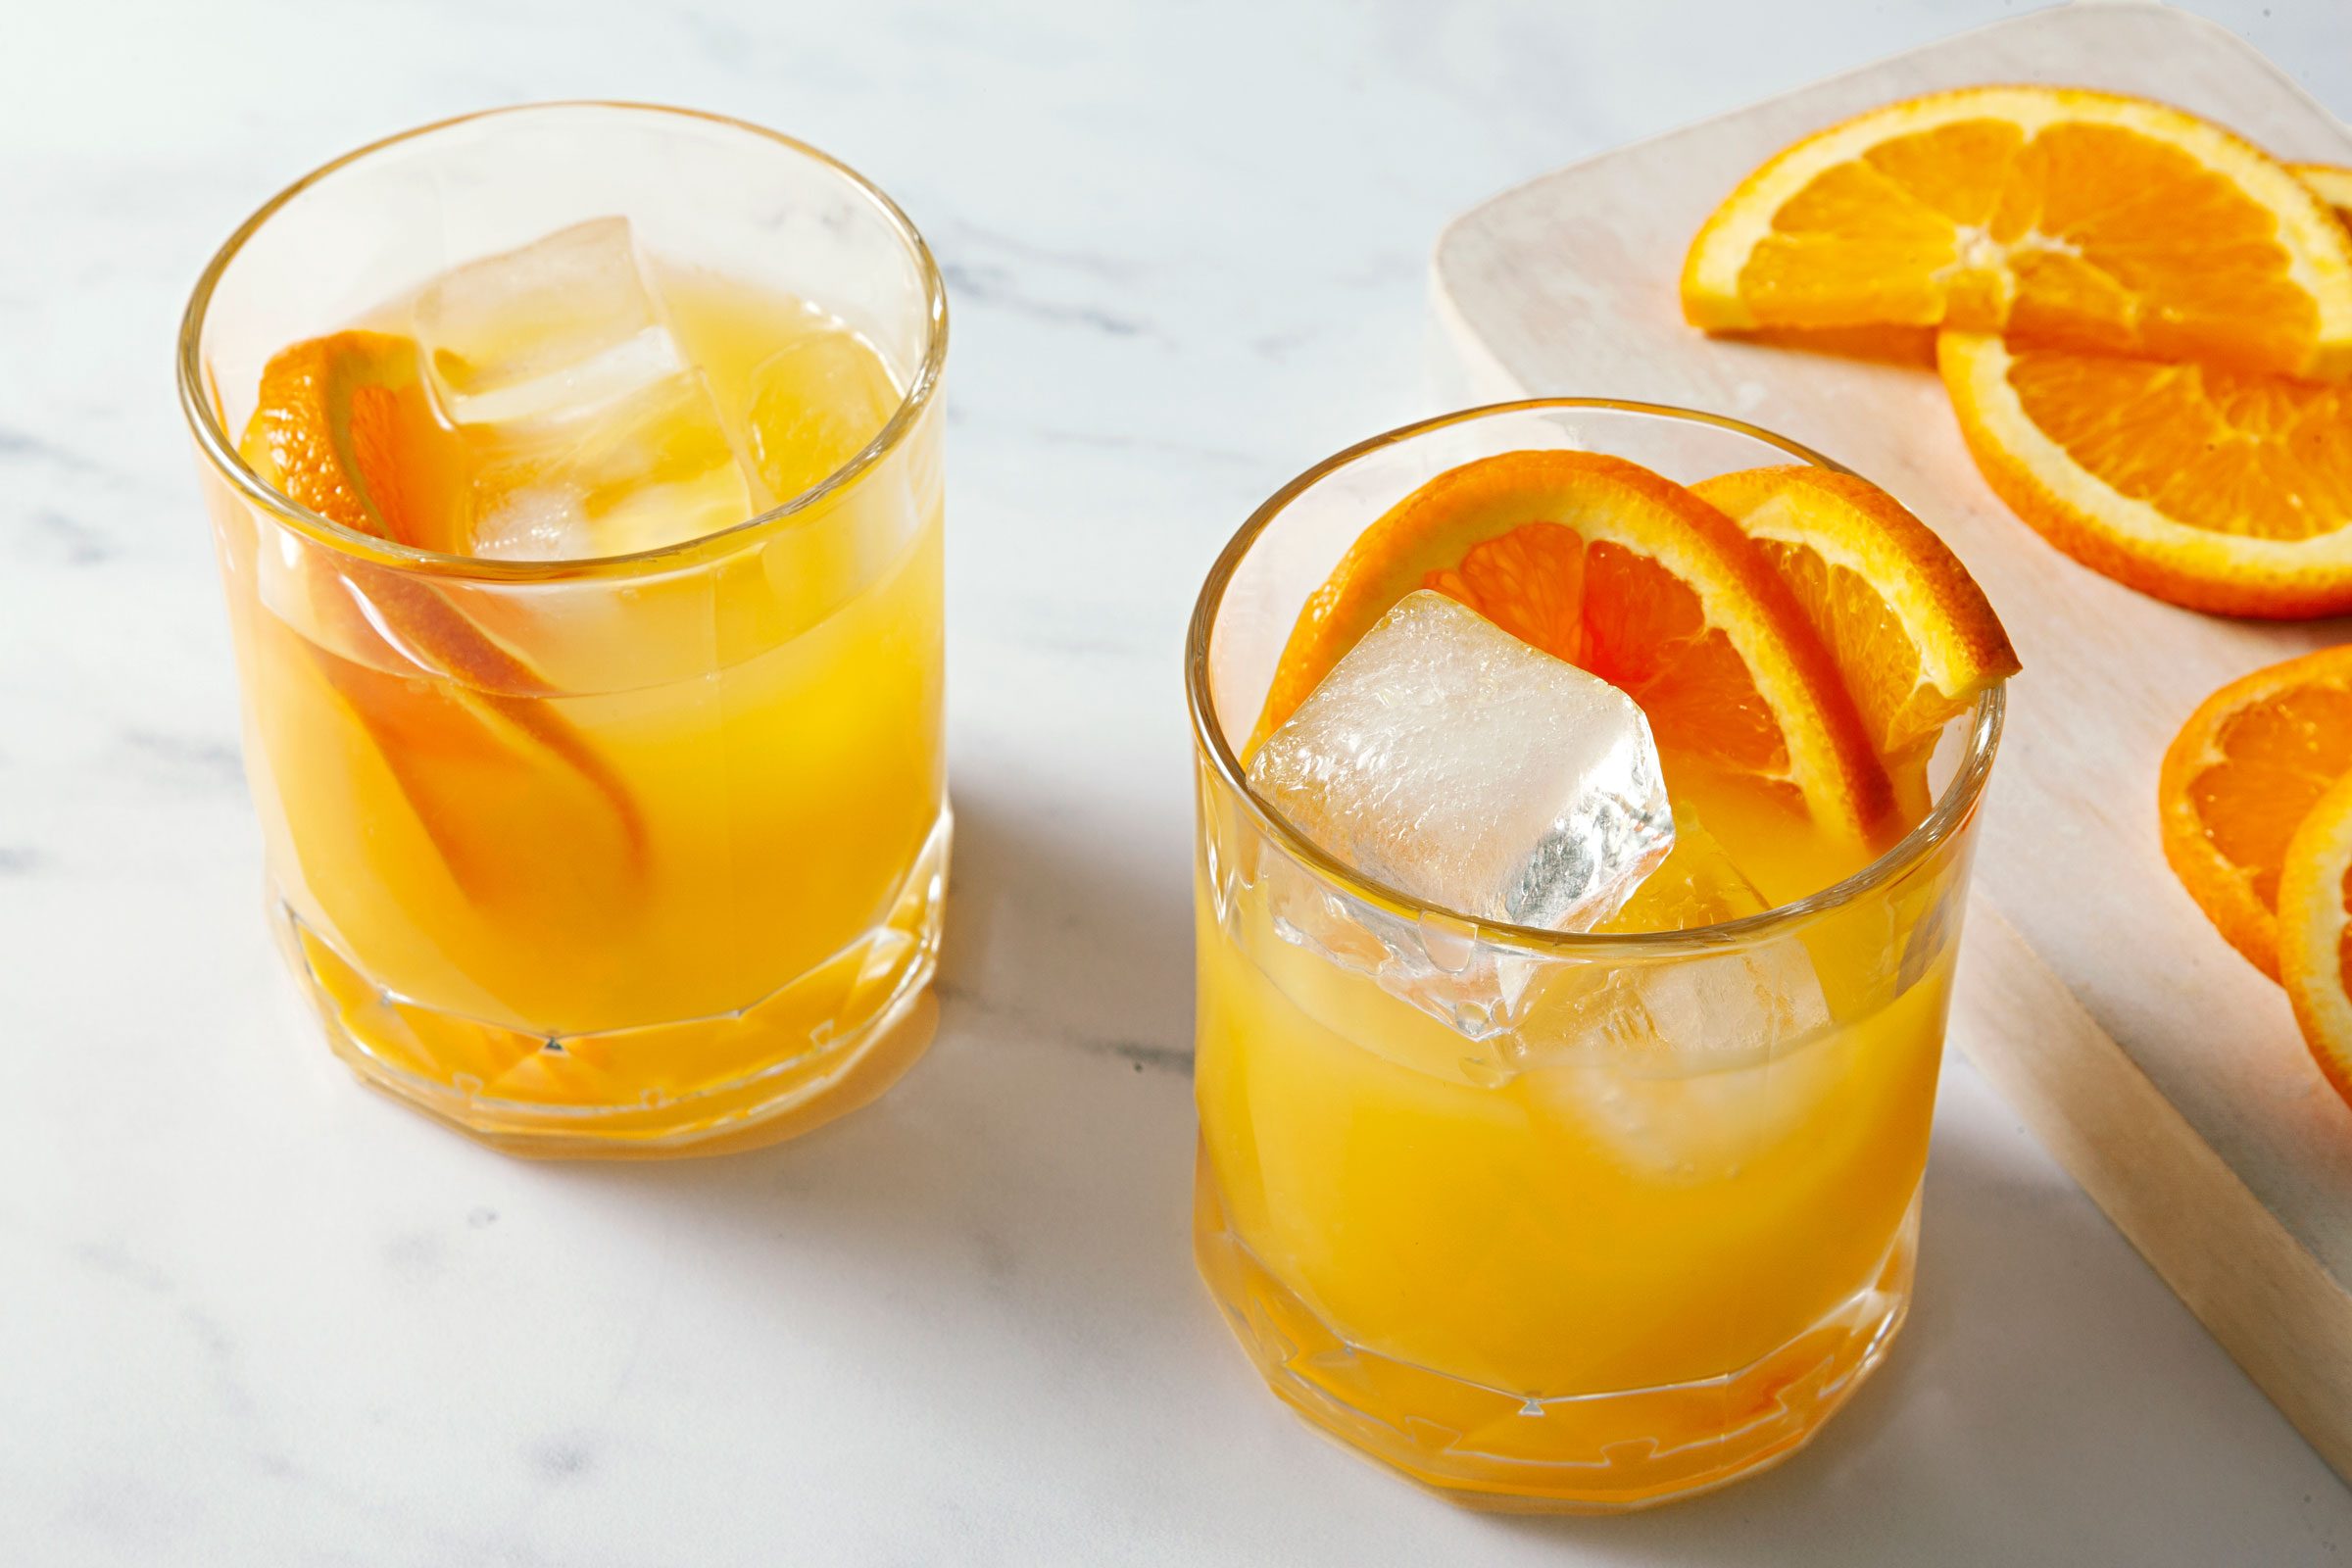 Two Screwdriver cocktail in glasses garnished with orange slices